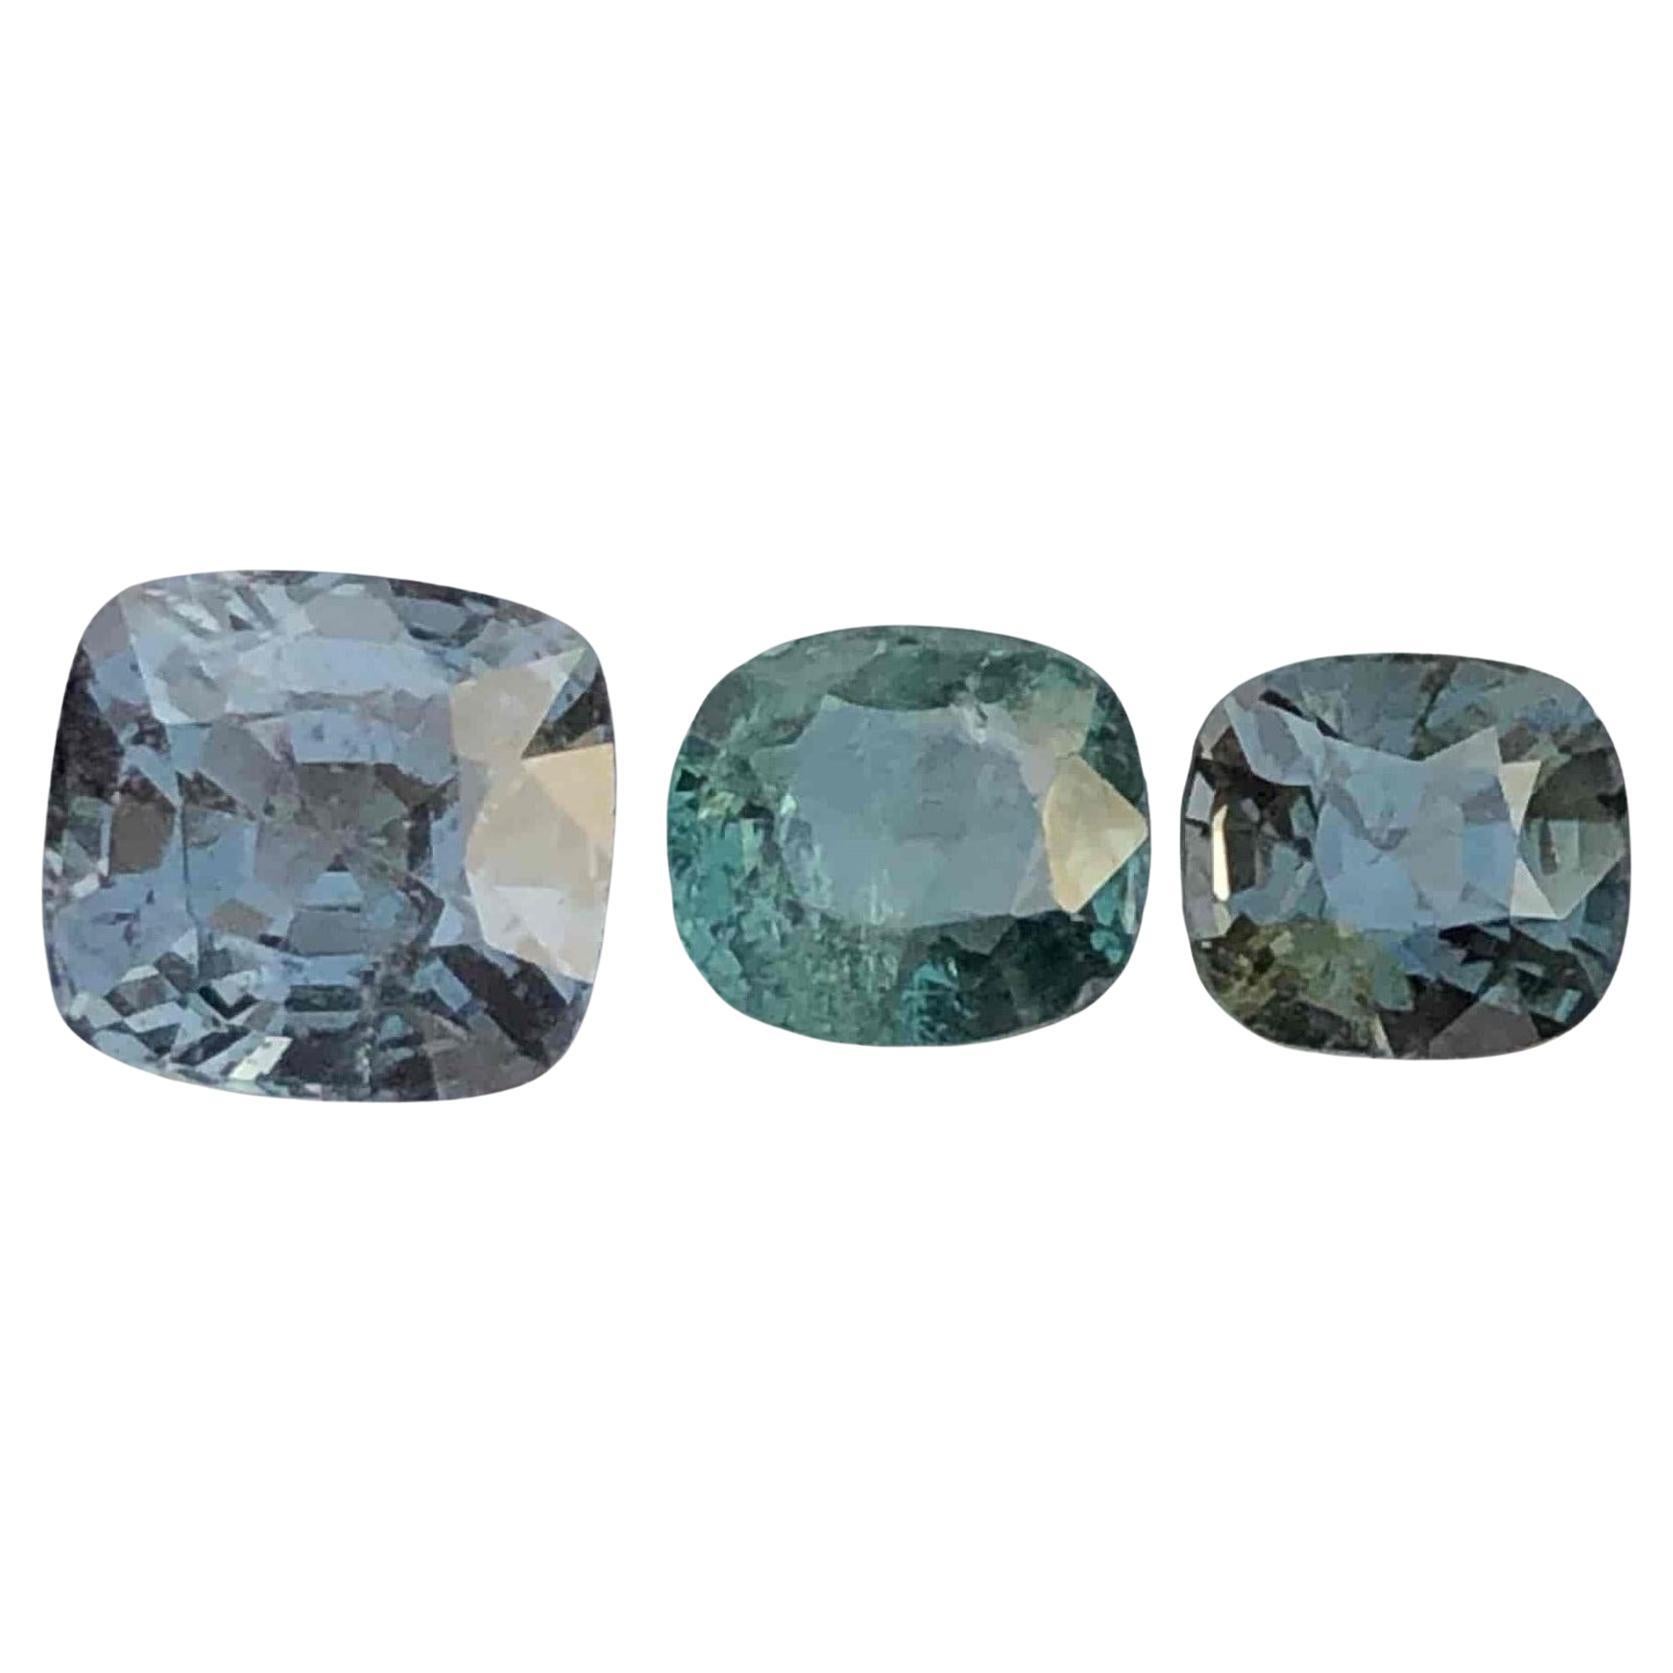 3.64 Carats Natural Gray Spinel Stones Batch Loose Gemstones From Burma For Sale